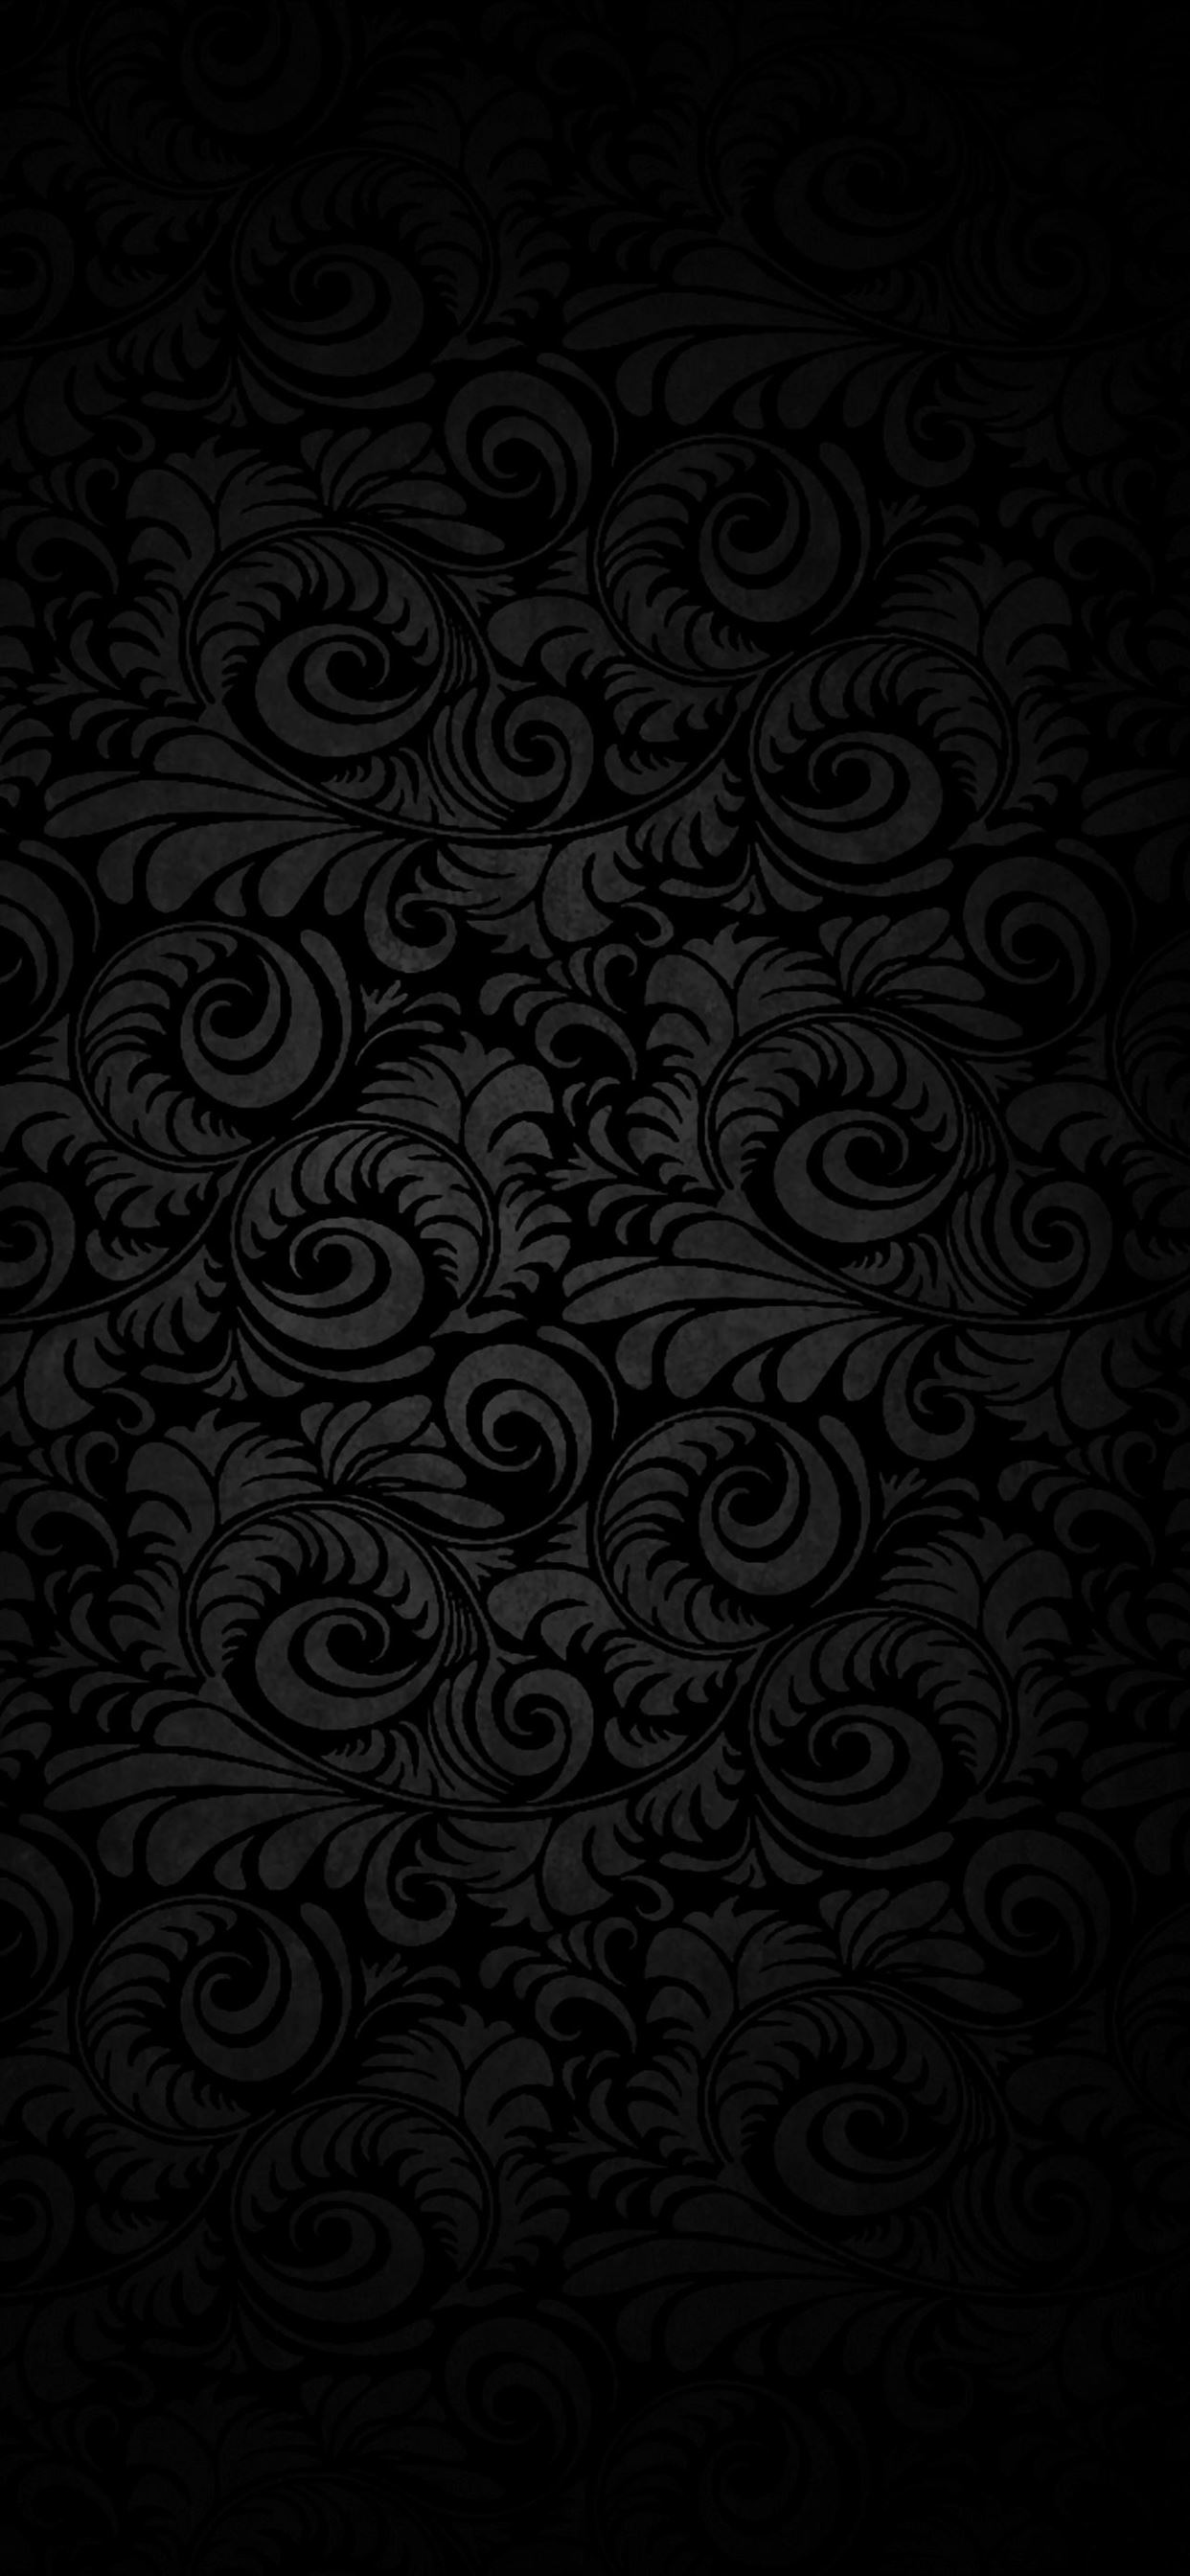 Dark patterned background iPhone Wallpapers Free Download